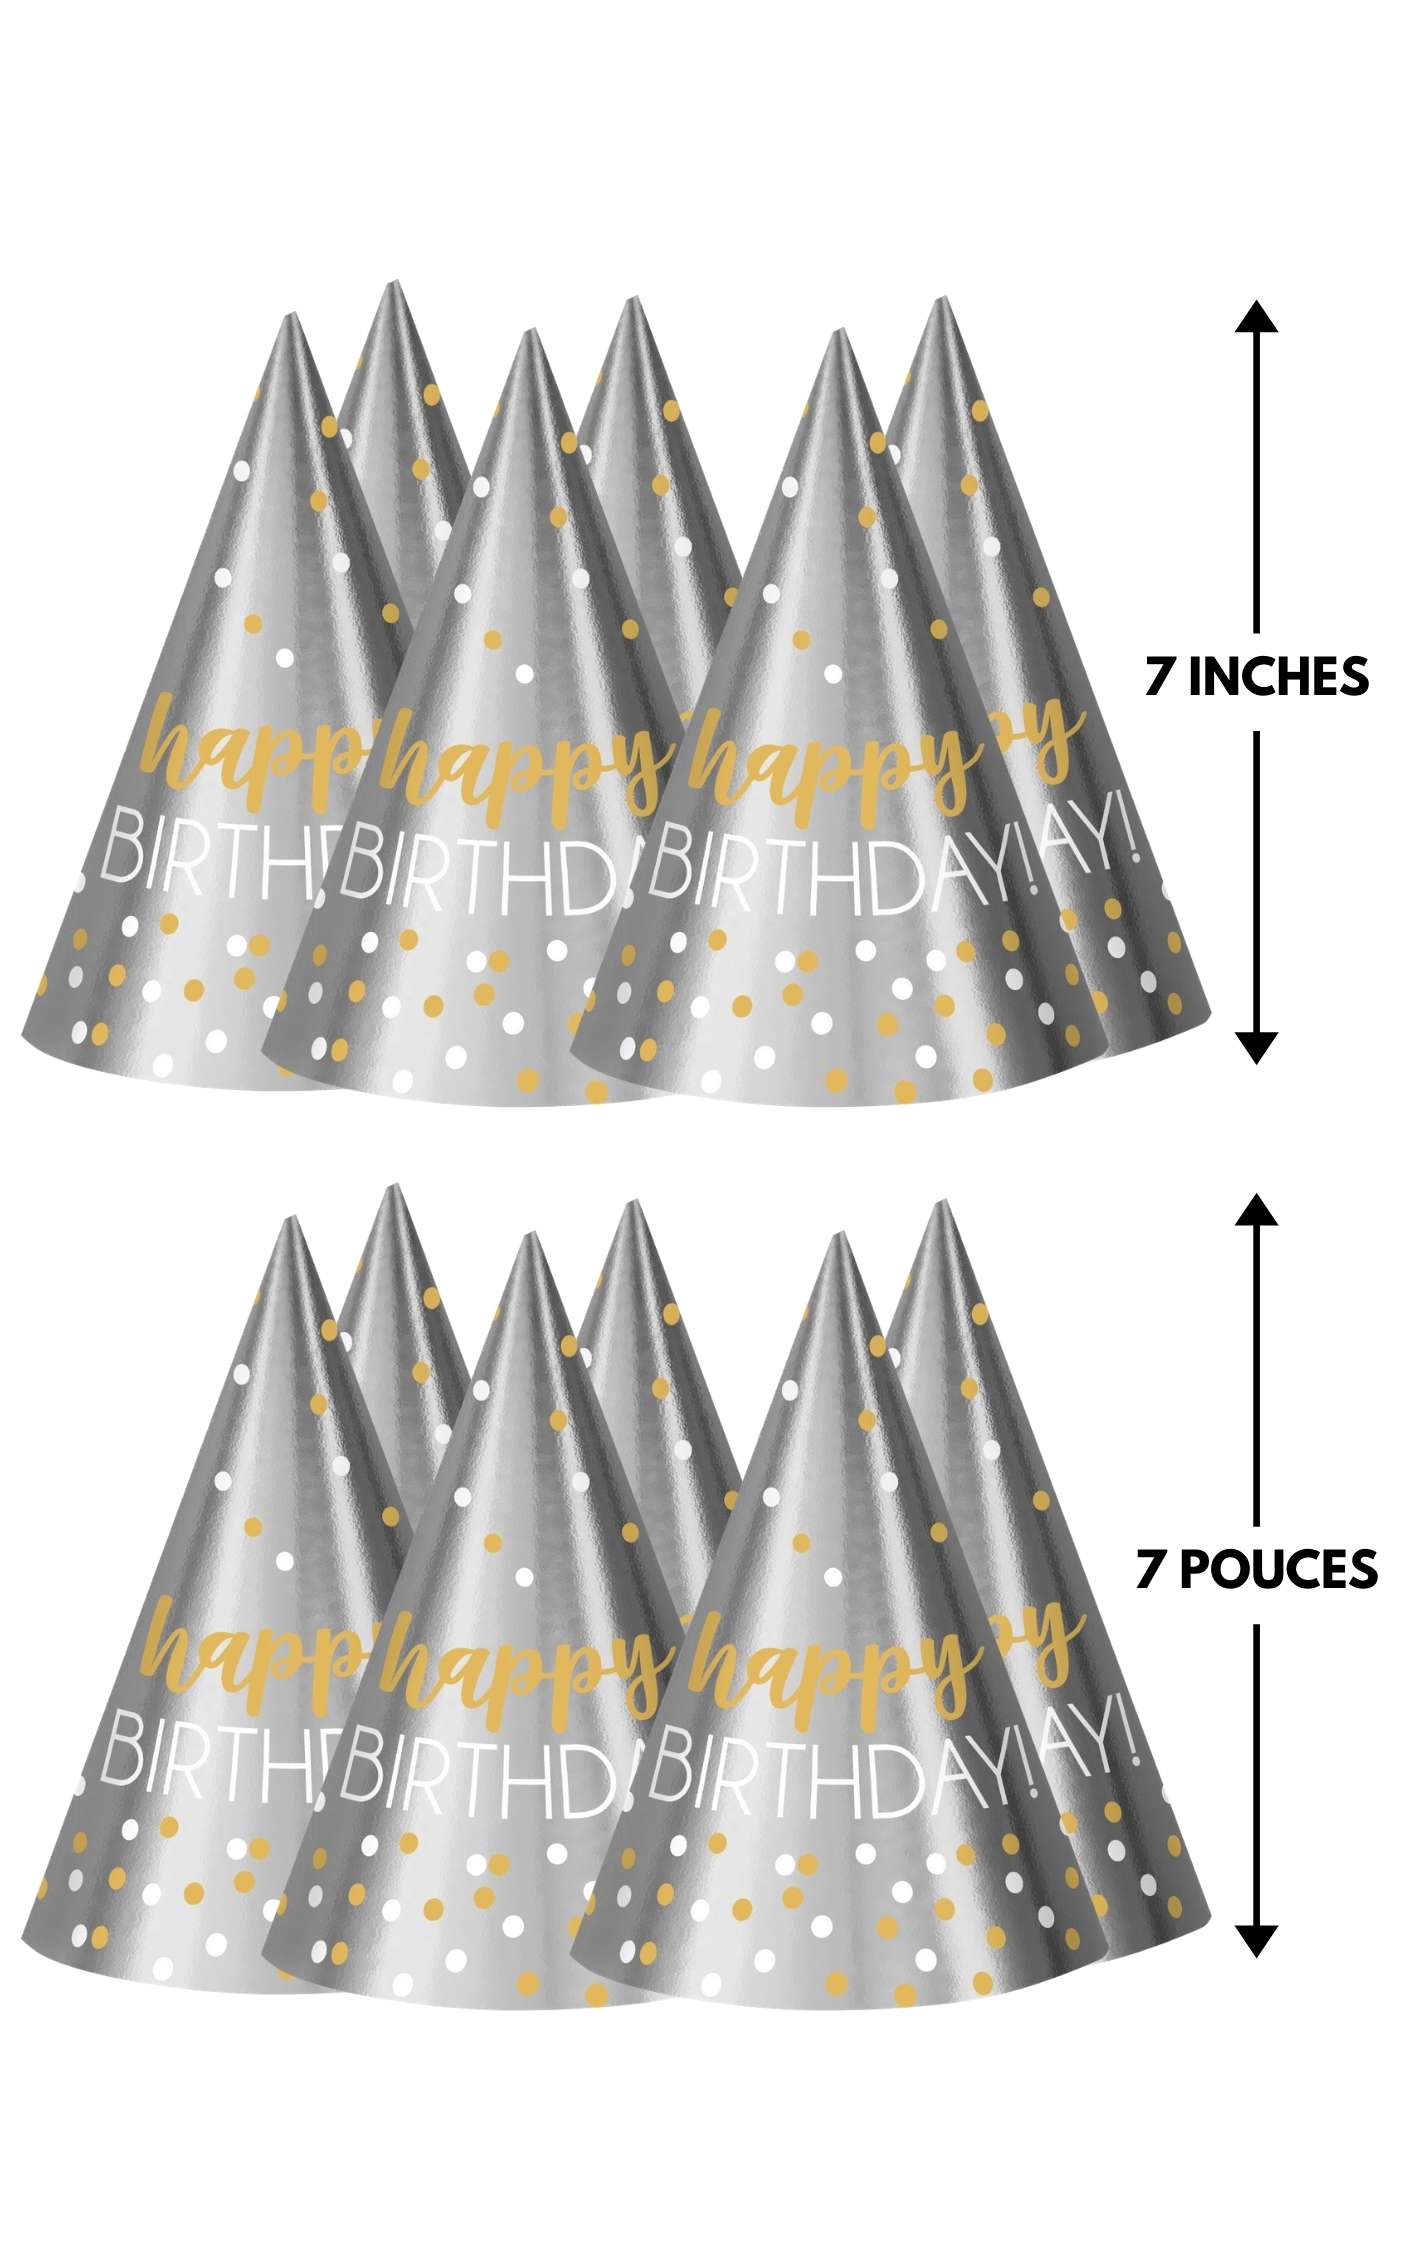 12 Cone Hats Birthday Accessories Silver & Gold Foil / Paper - 7 inches